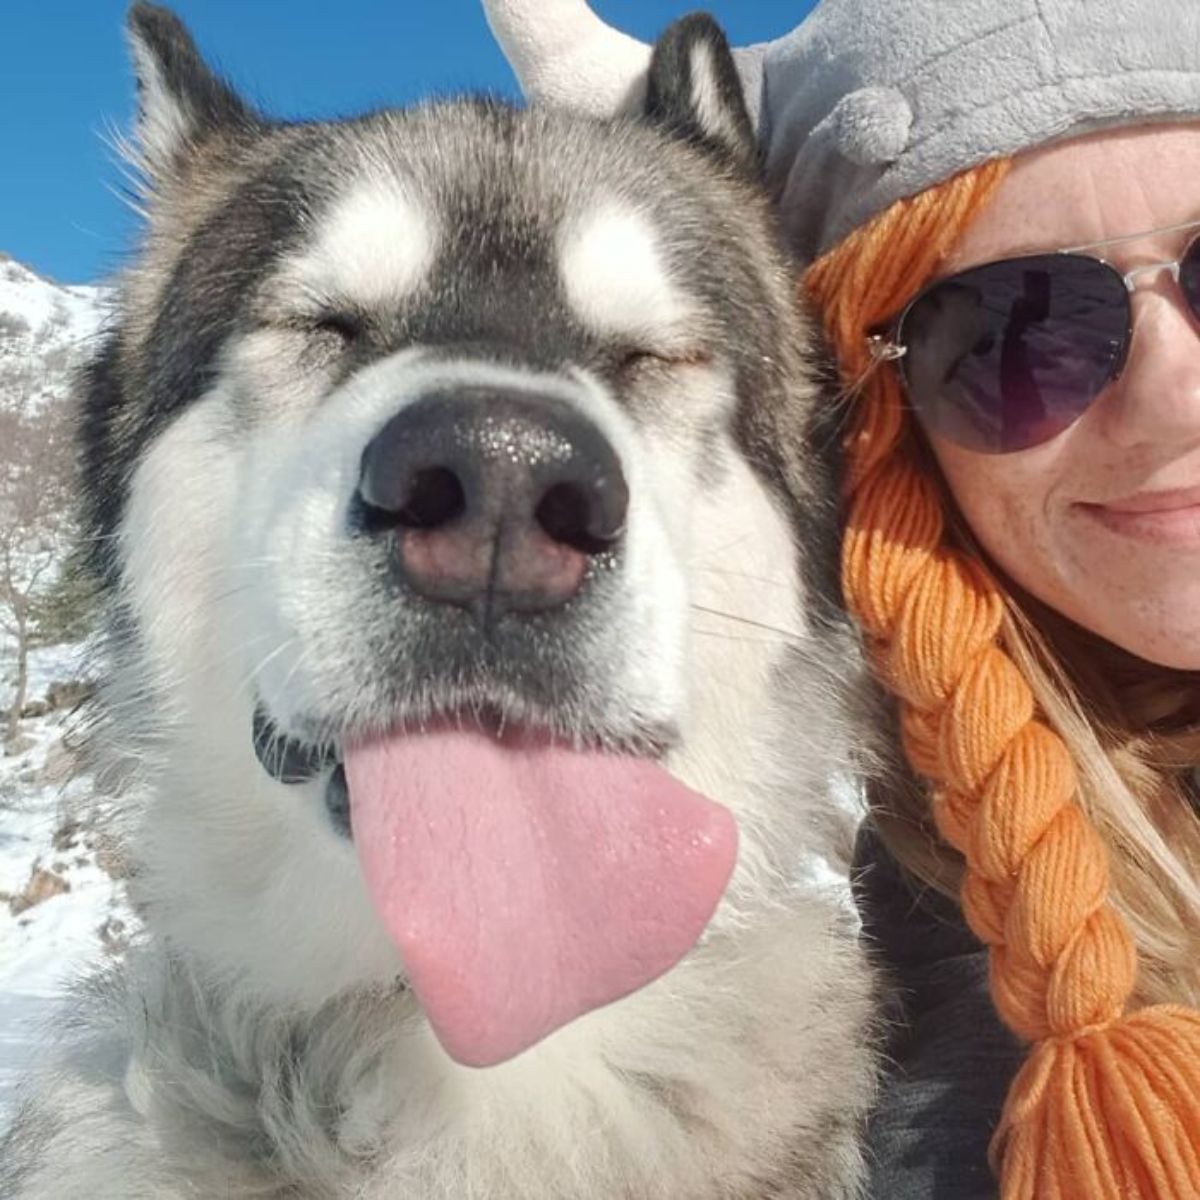 alaskan malamute sticking tongue out while being hugged by a woman